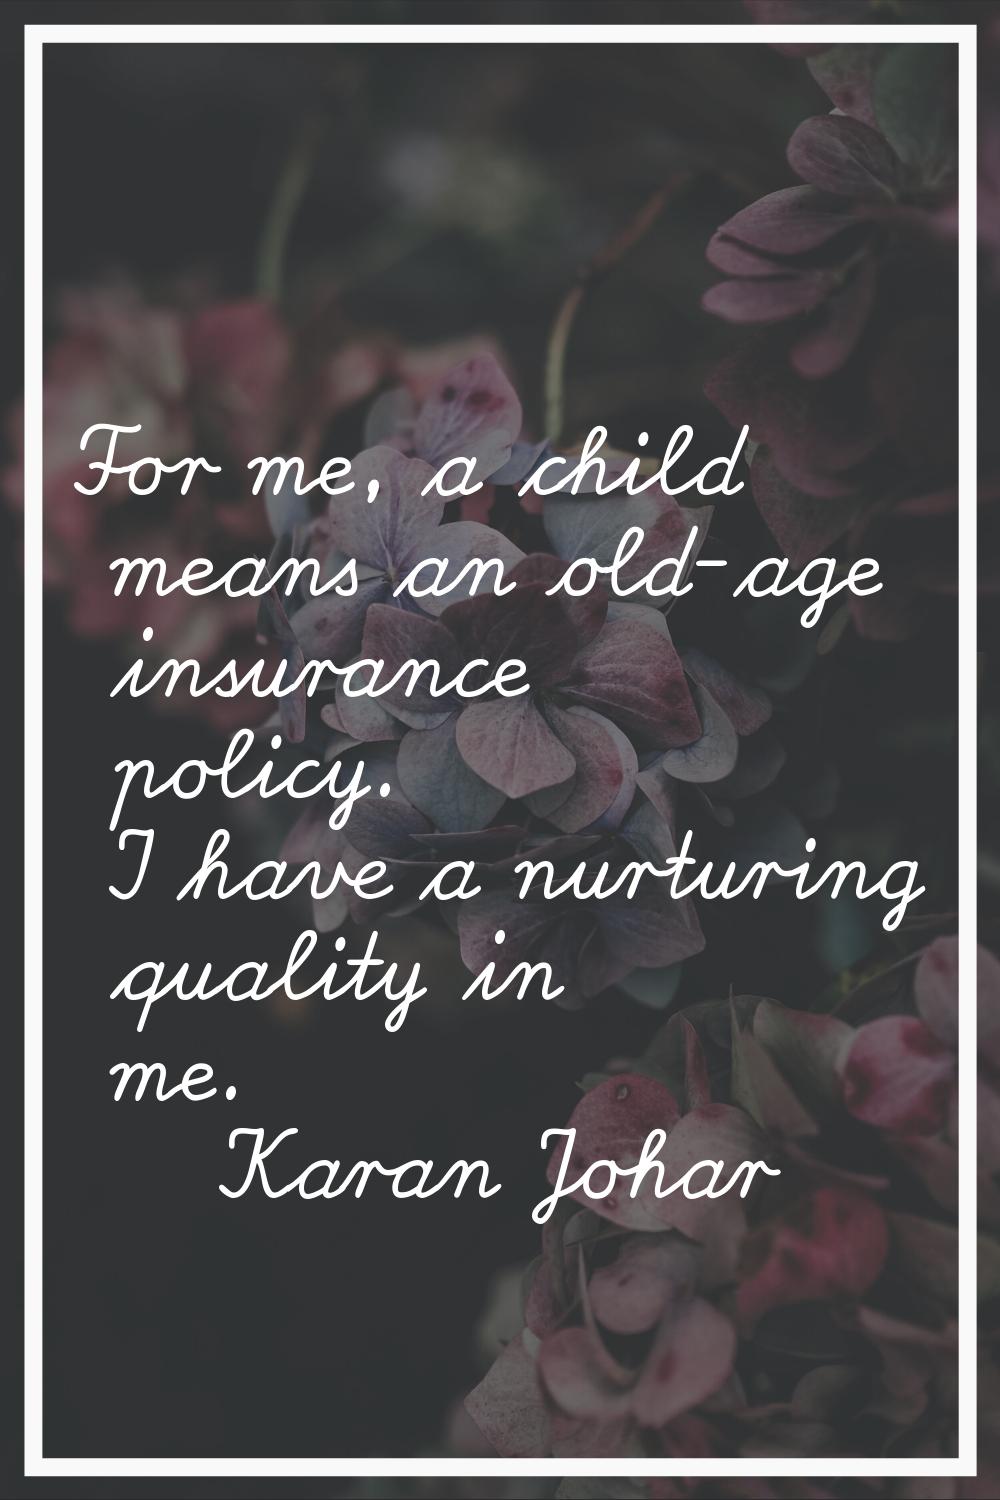 For me, a child means an old-age insurance policy. I have a nurturing quality in me.